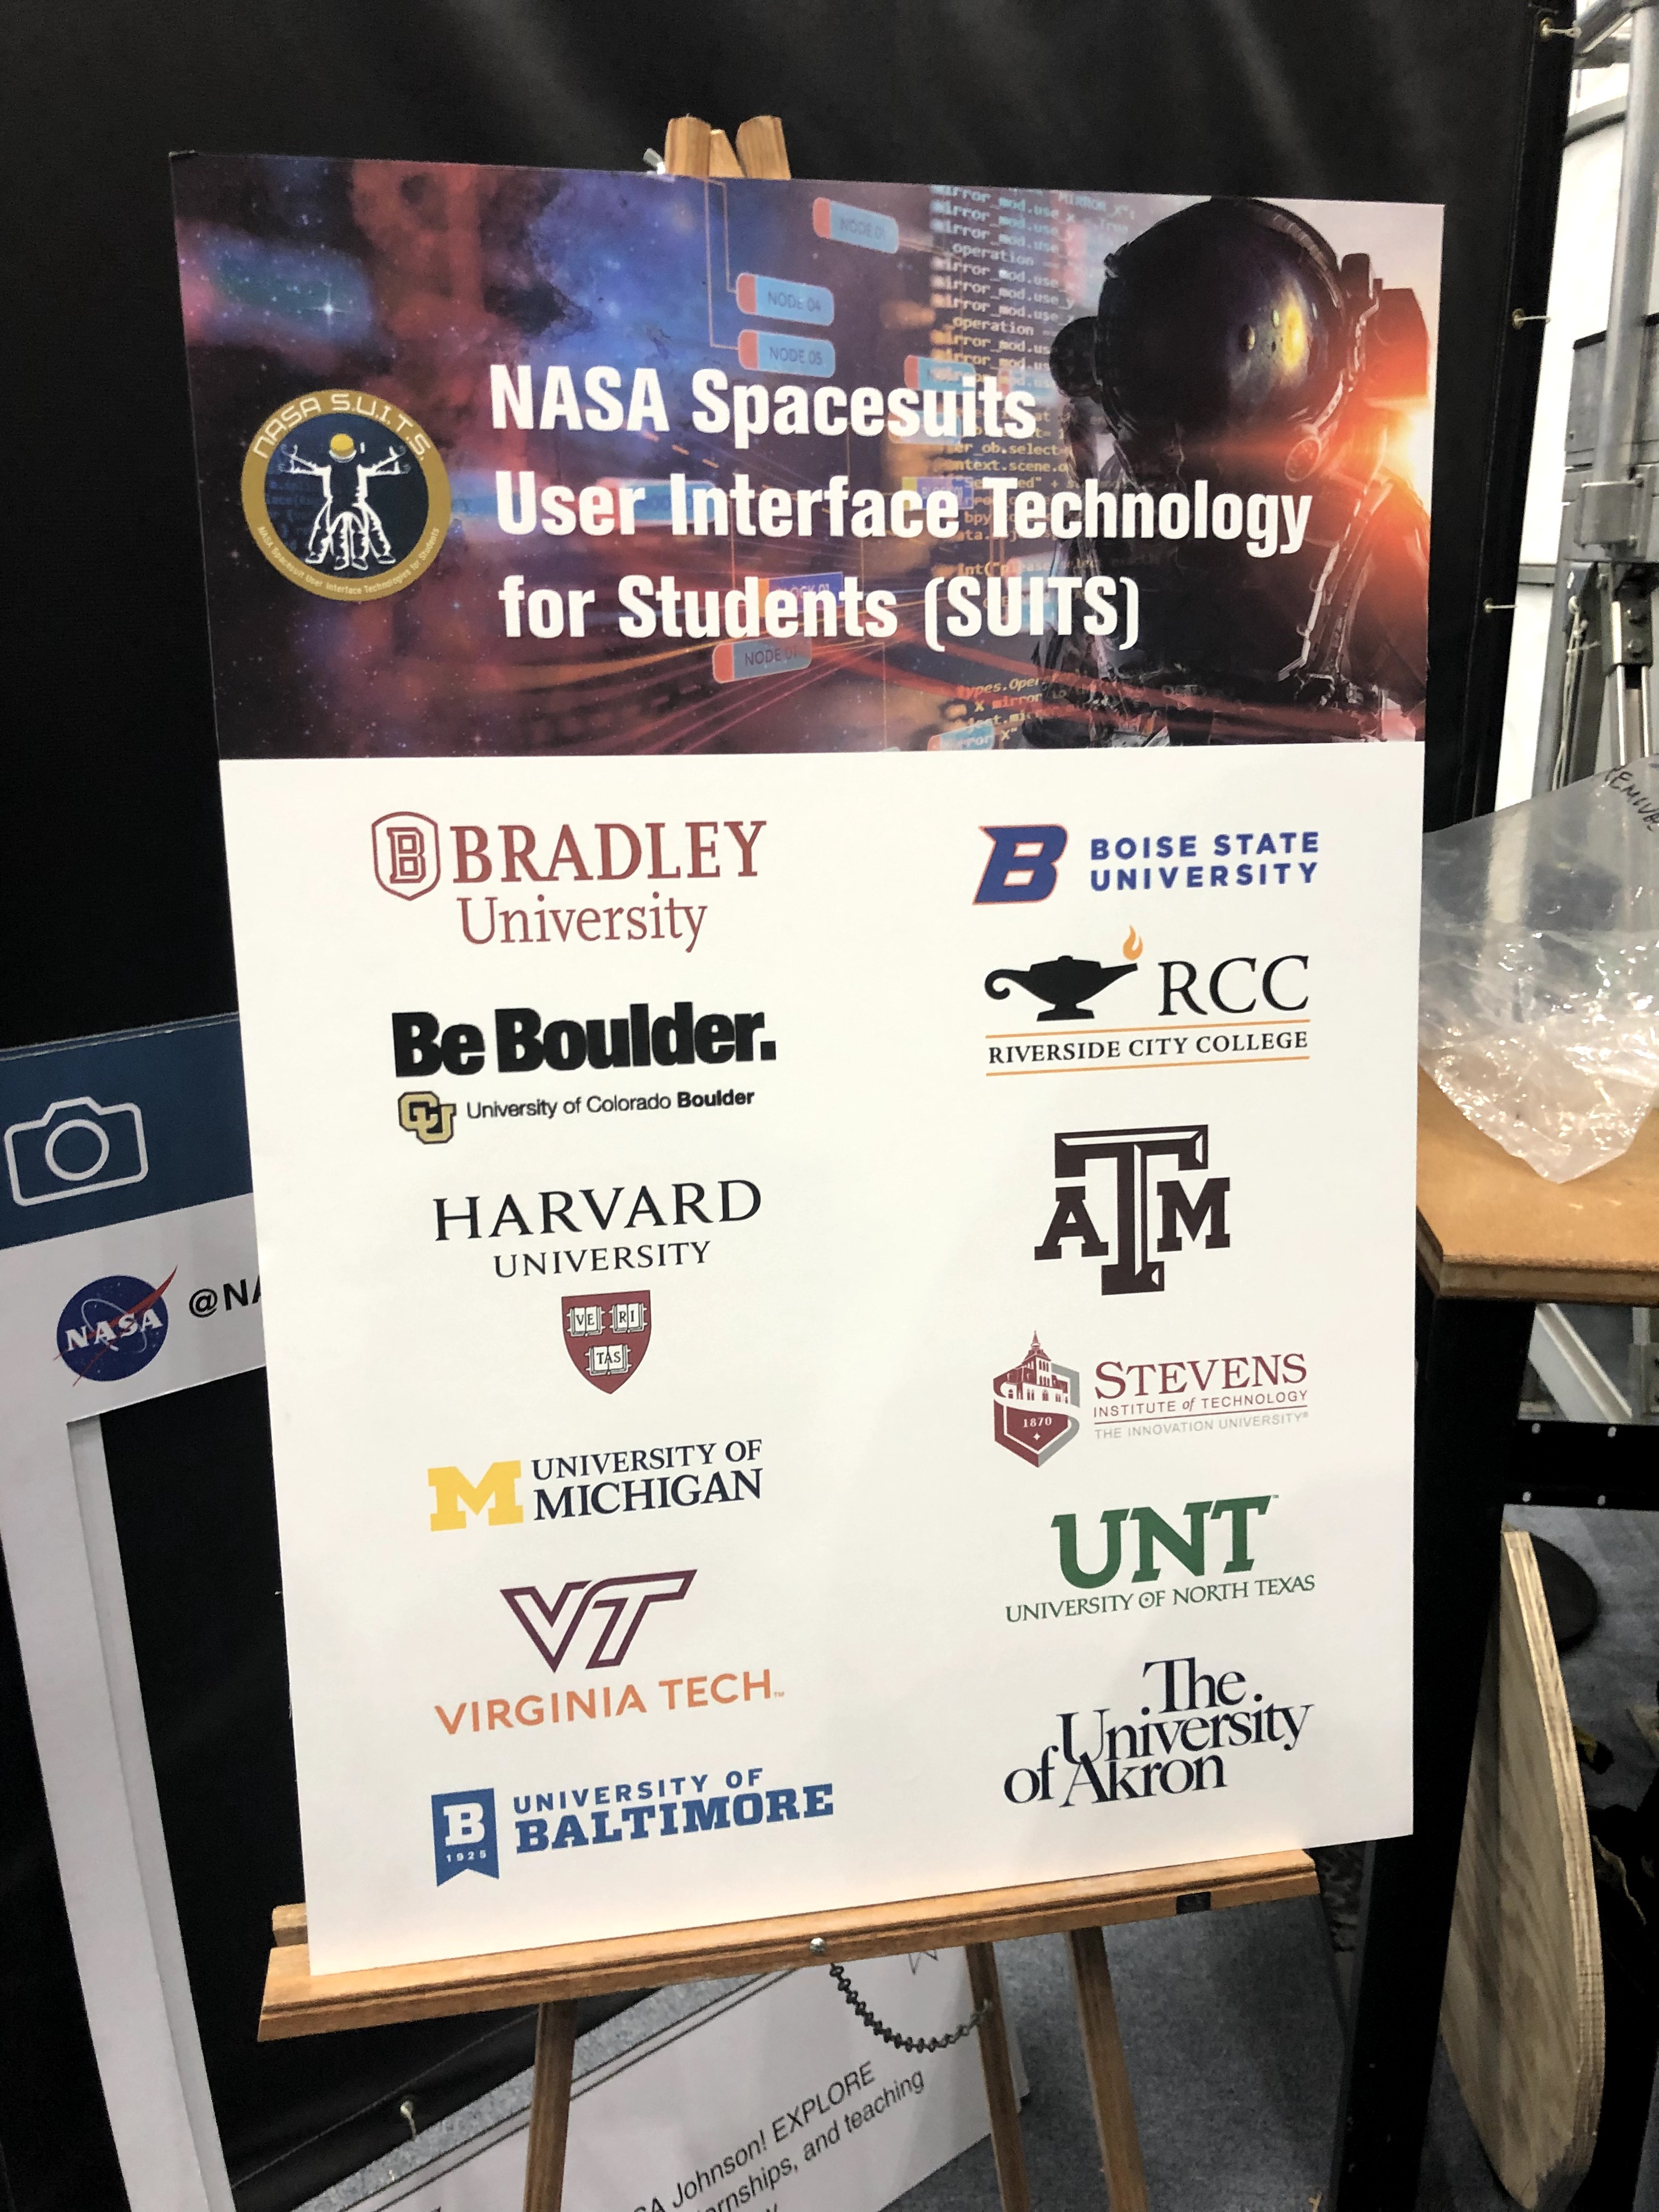 Image of Promotional Material at Johnson Space Center revealing the schools involved in the NASA Suits challenge. Boise State is listed among schools such as Harvard and Virginia Tech